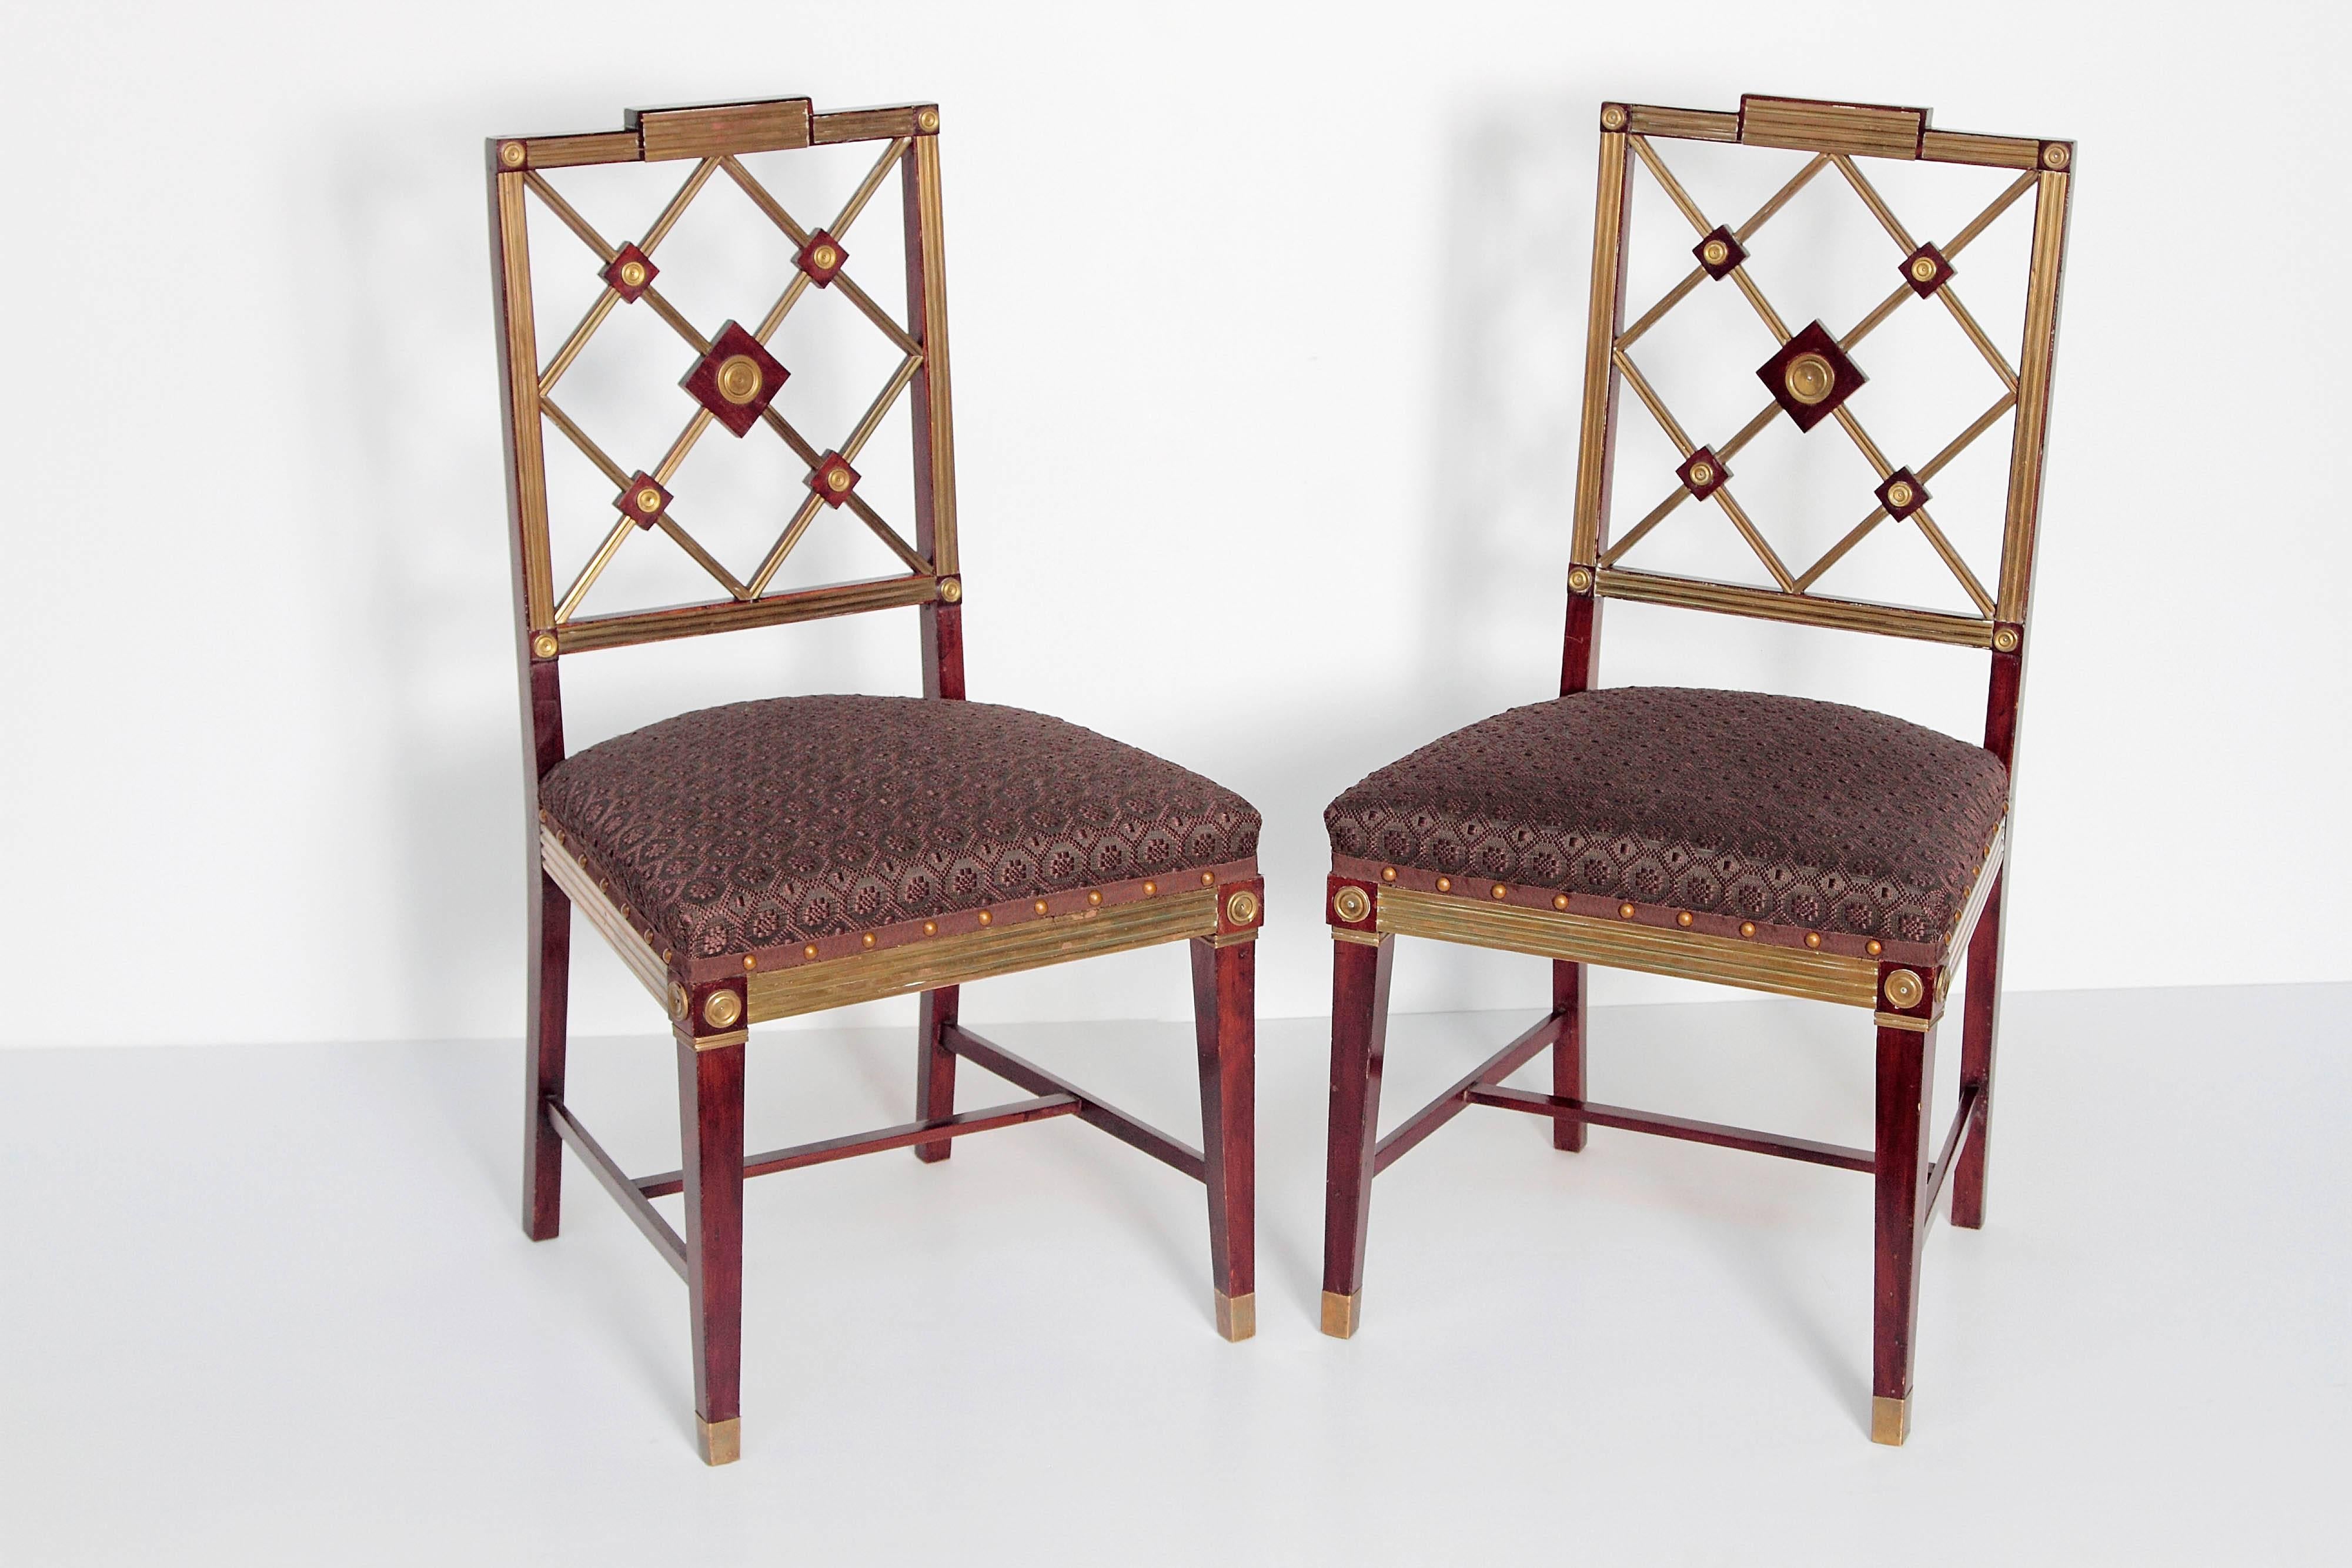 A pair of Russian Empire neoclassical side chairs, mahogany with fluted brass mouldings and fittings, the backs of joined latticework design with tight seats in dark chocolate brown horsehair upholstery with spaced nail-heads and trim. Imperial